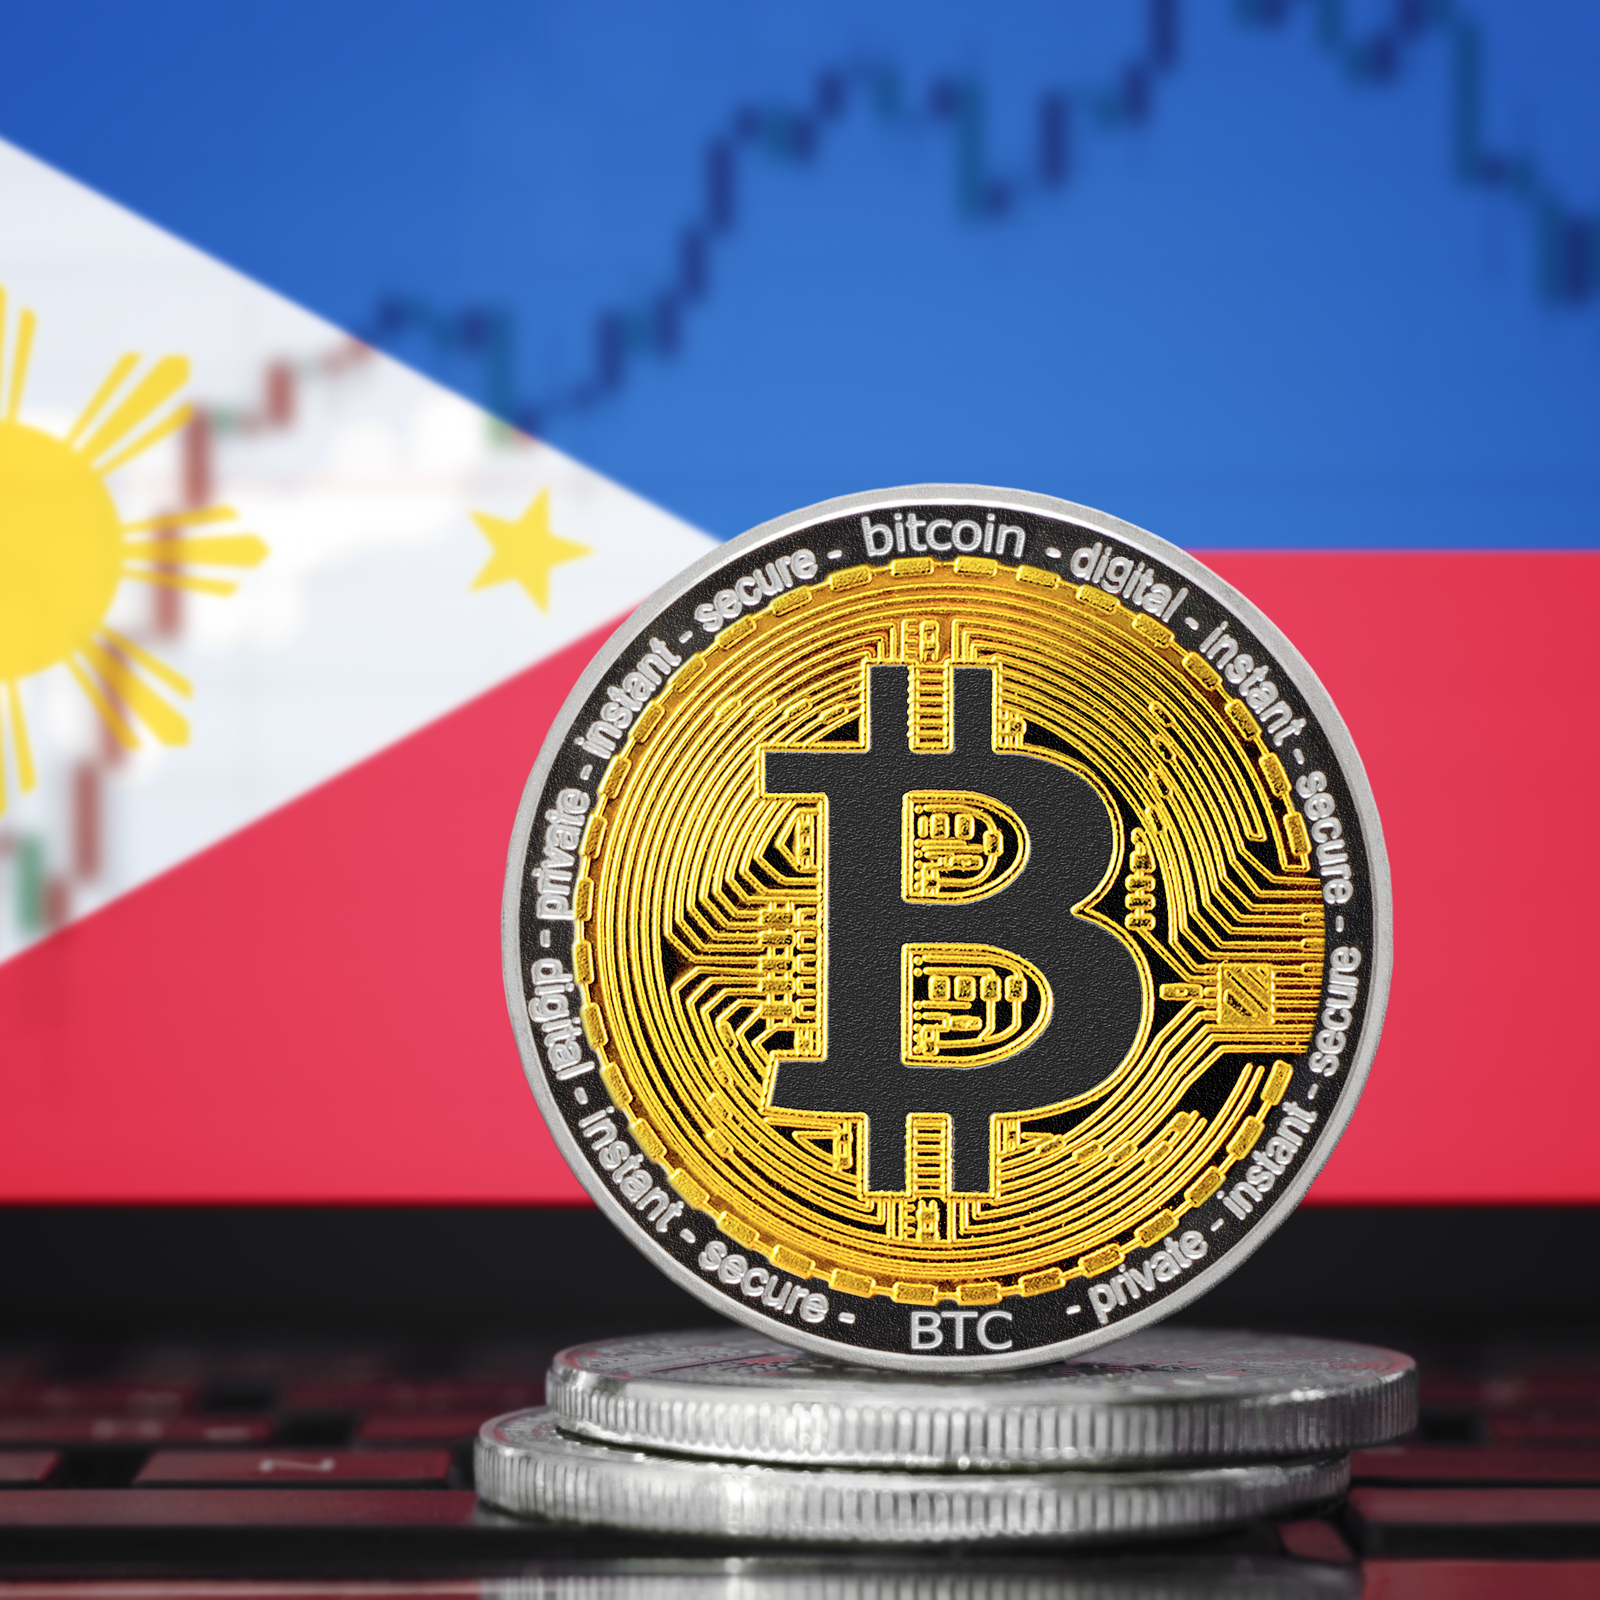 Philippine SEC Approves Draft Rules for ICOs and Crypto